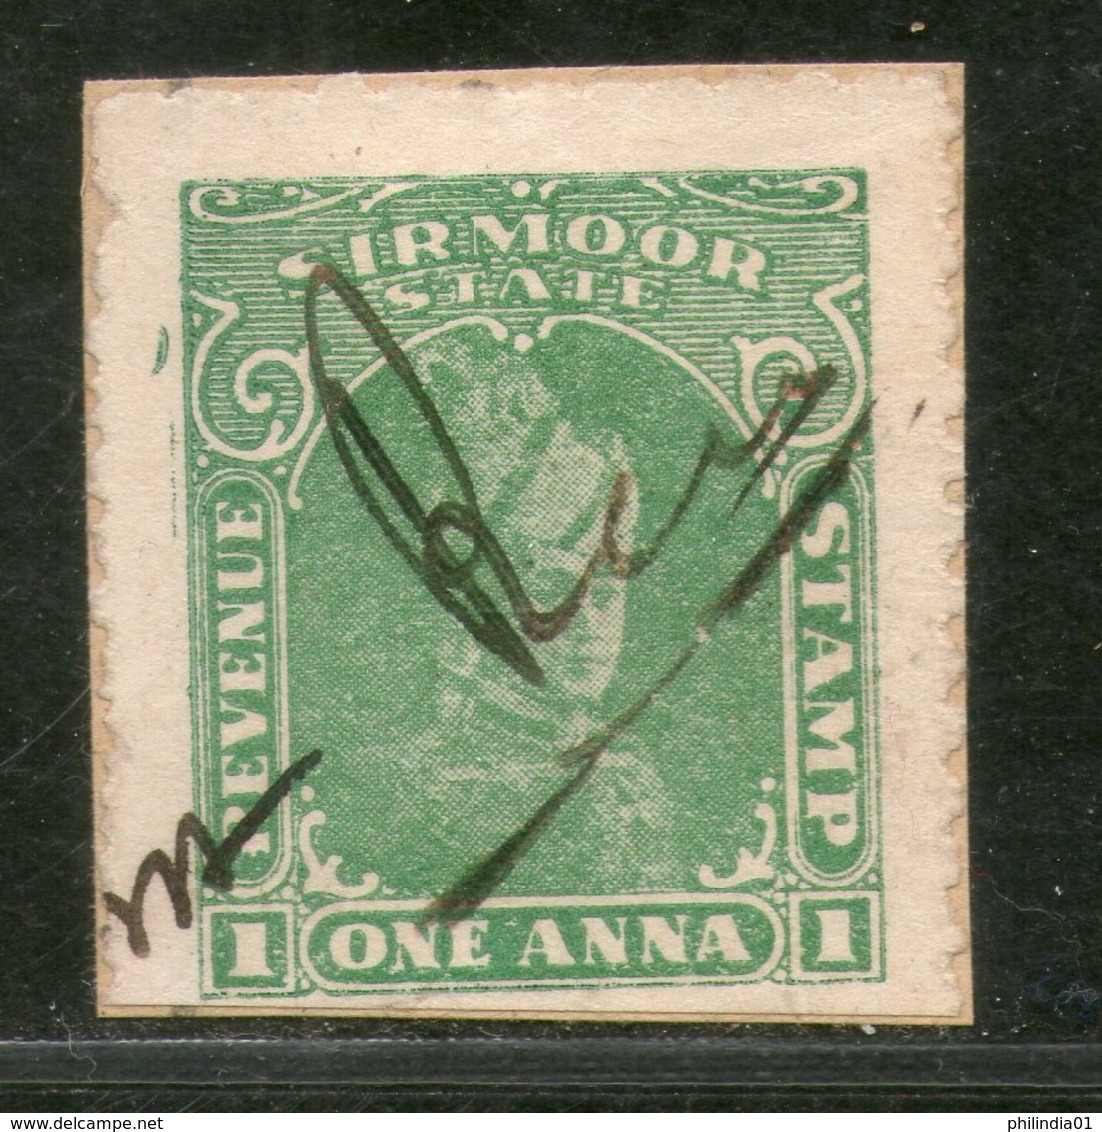 India Fiscal Sirmoor State 1 An King Type15 KM151 Court Fee Revenue Stamp # 278C - Sirmur